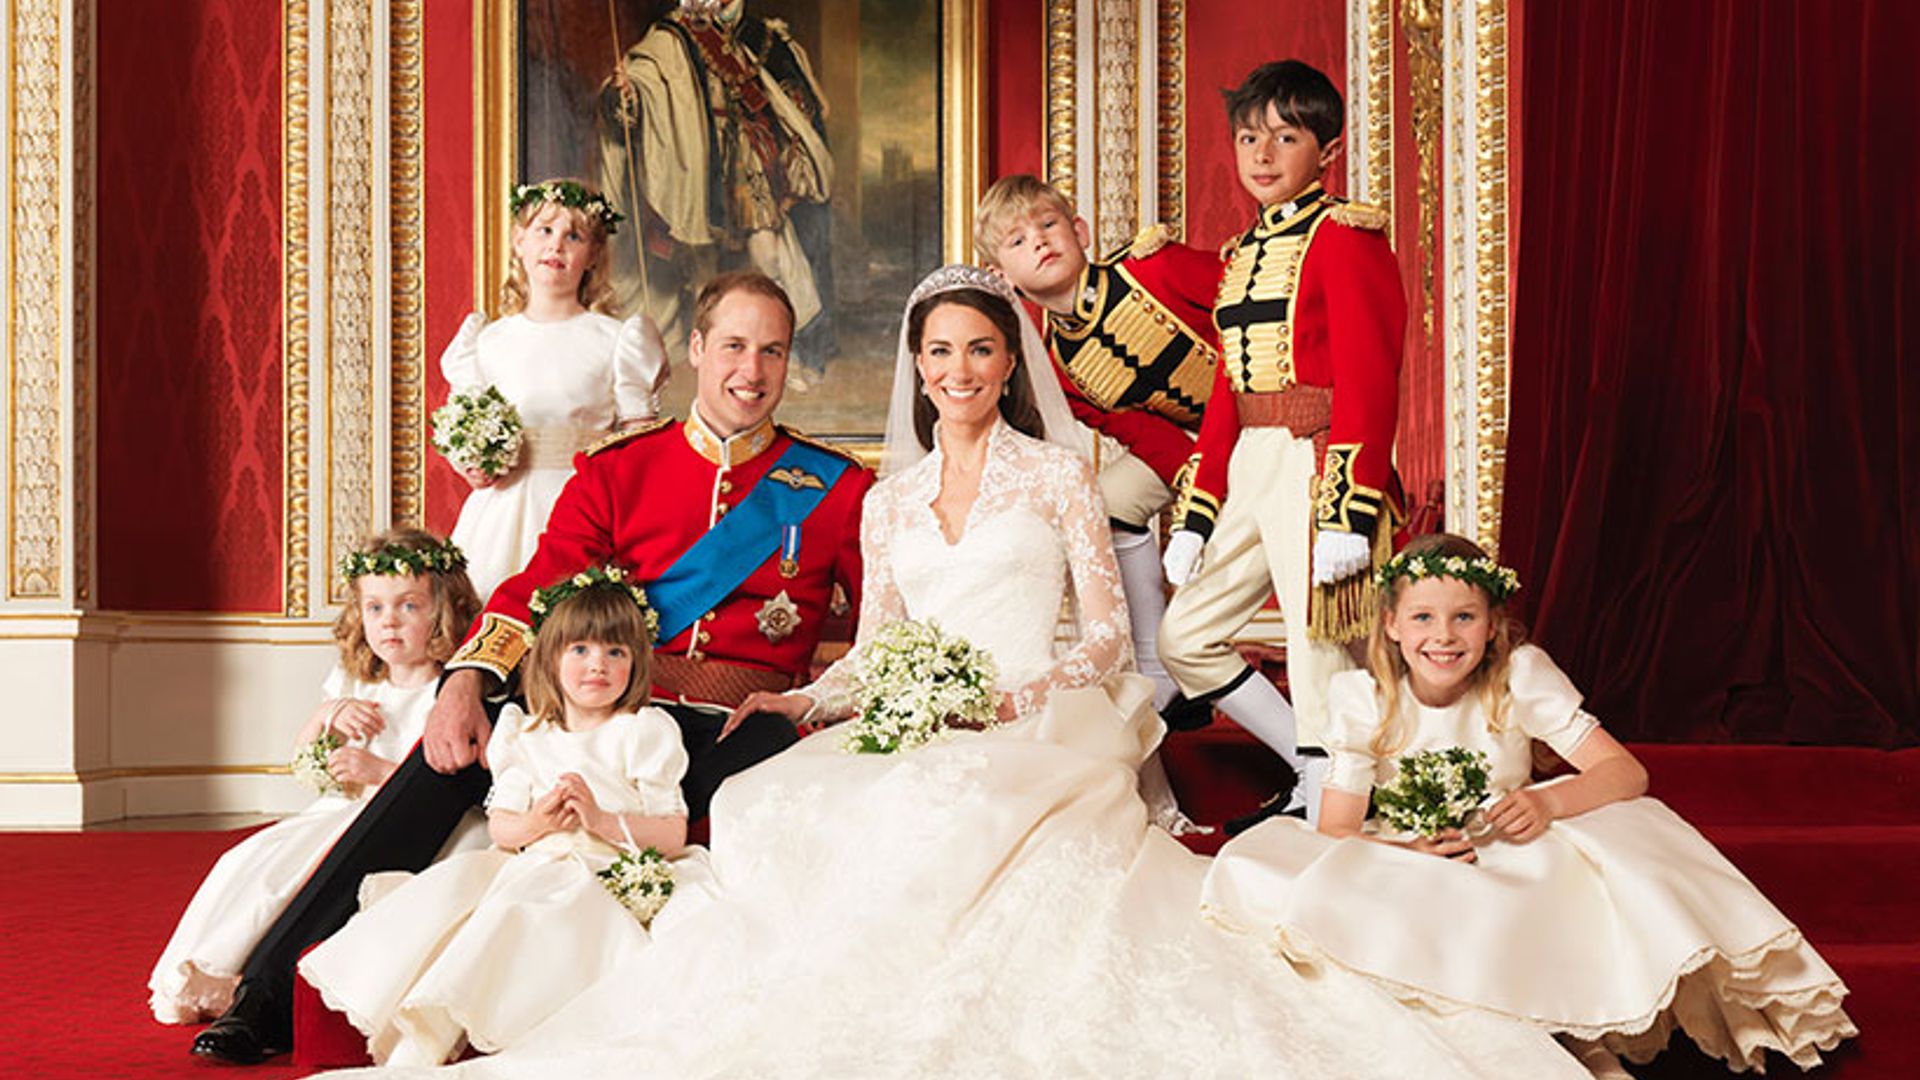 Where are Prince William and Kate Middleton's young bridesmaids and page boys now?